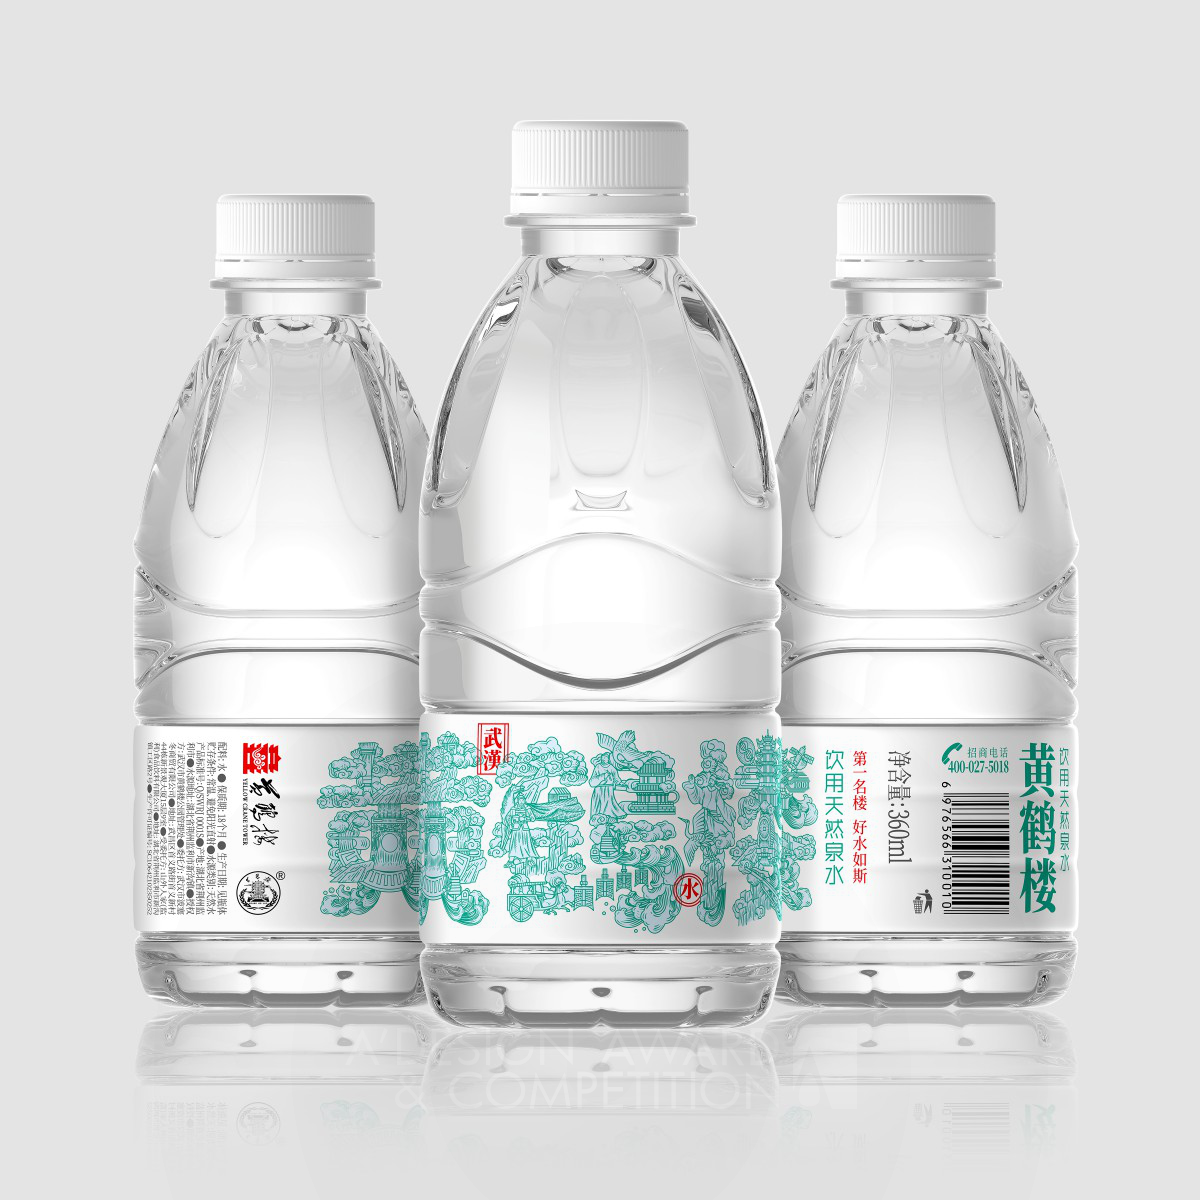 Jin Zhang wins Bronze at the prestigious A' Packaging Design Award with Yellow Crane Tower Water Packaging.